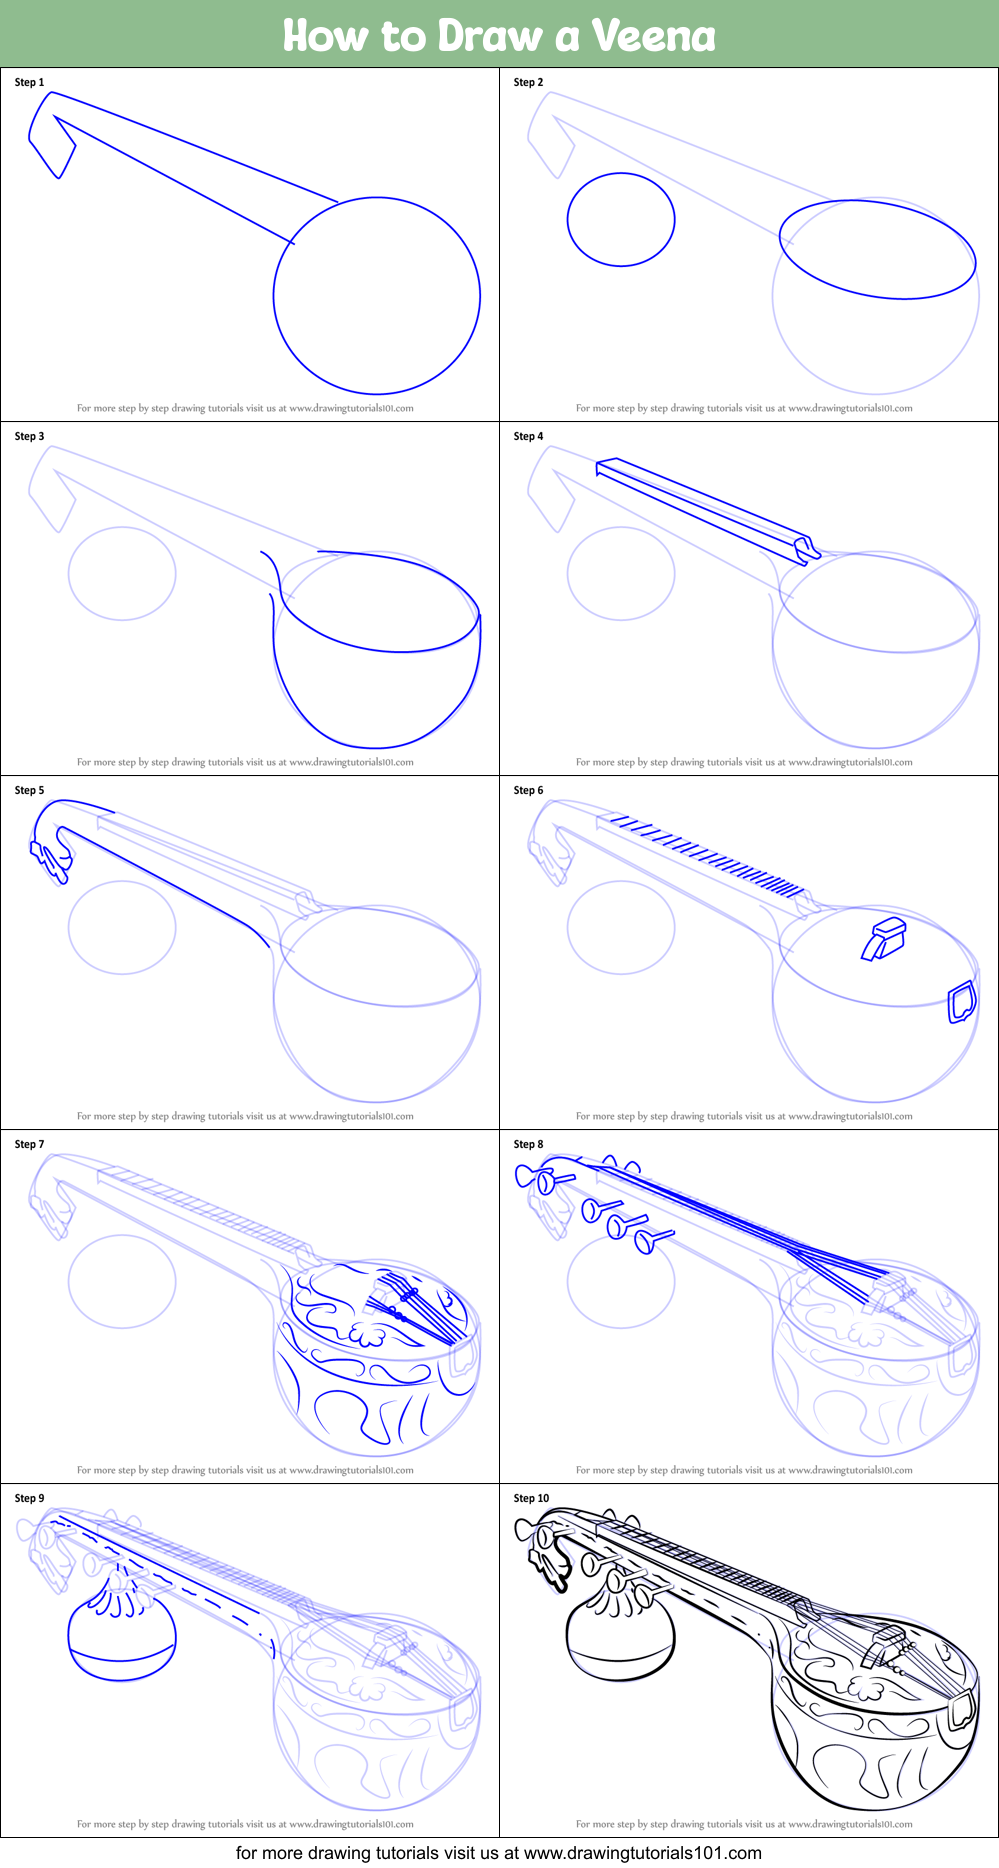 How to Draw a Veena printable step by step drawing sheet 